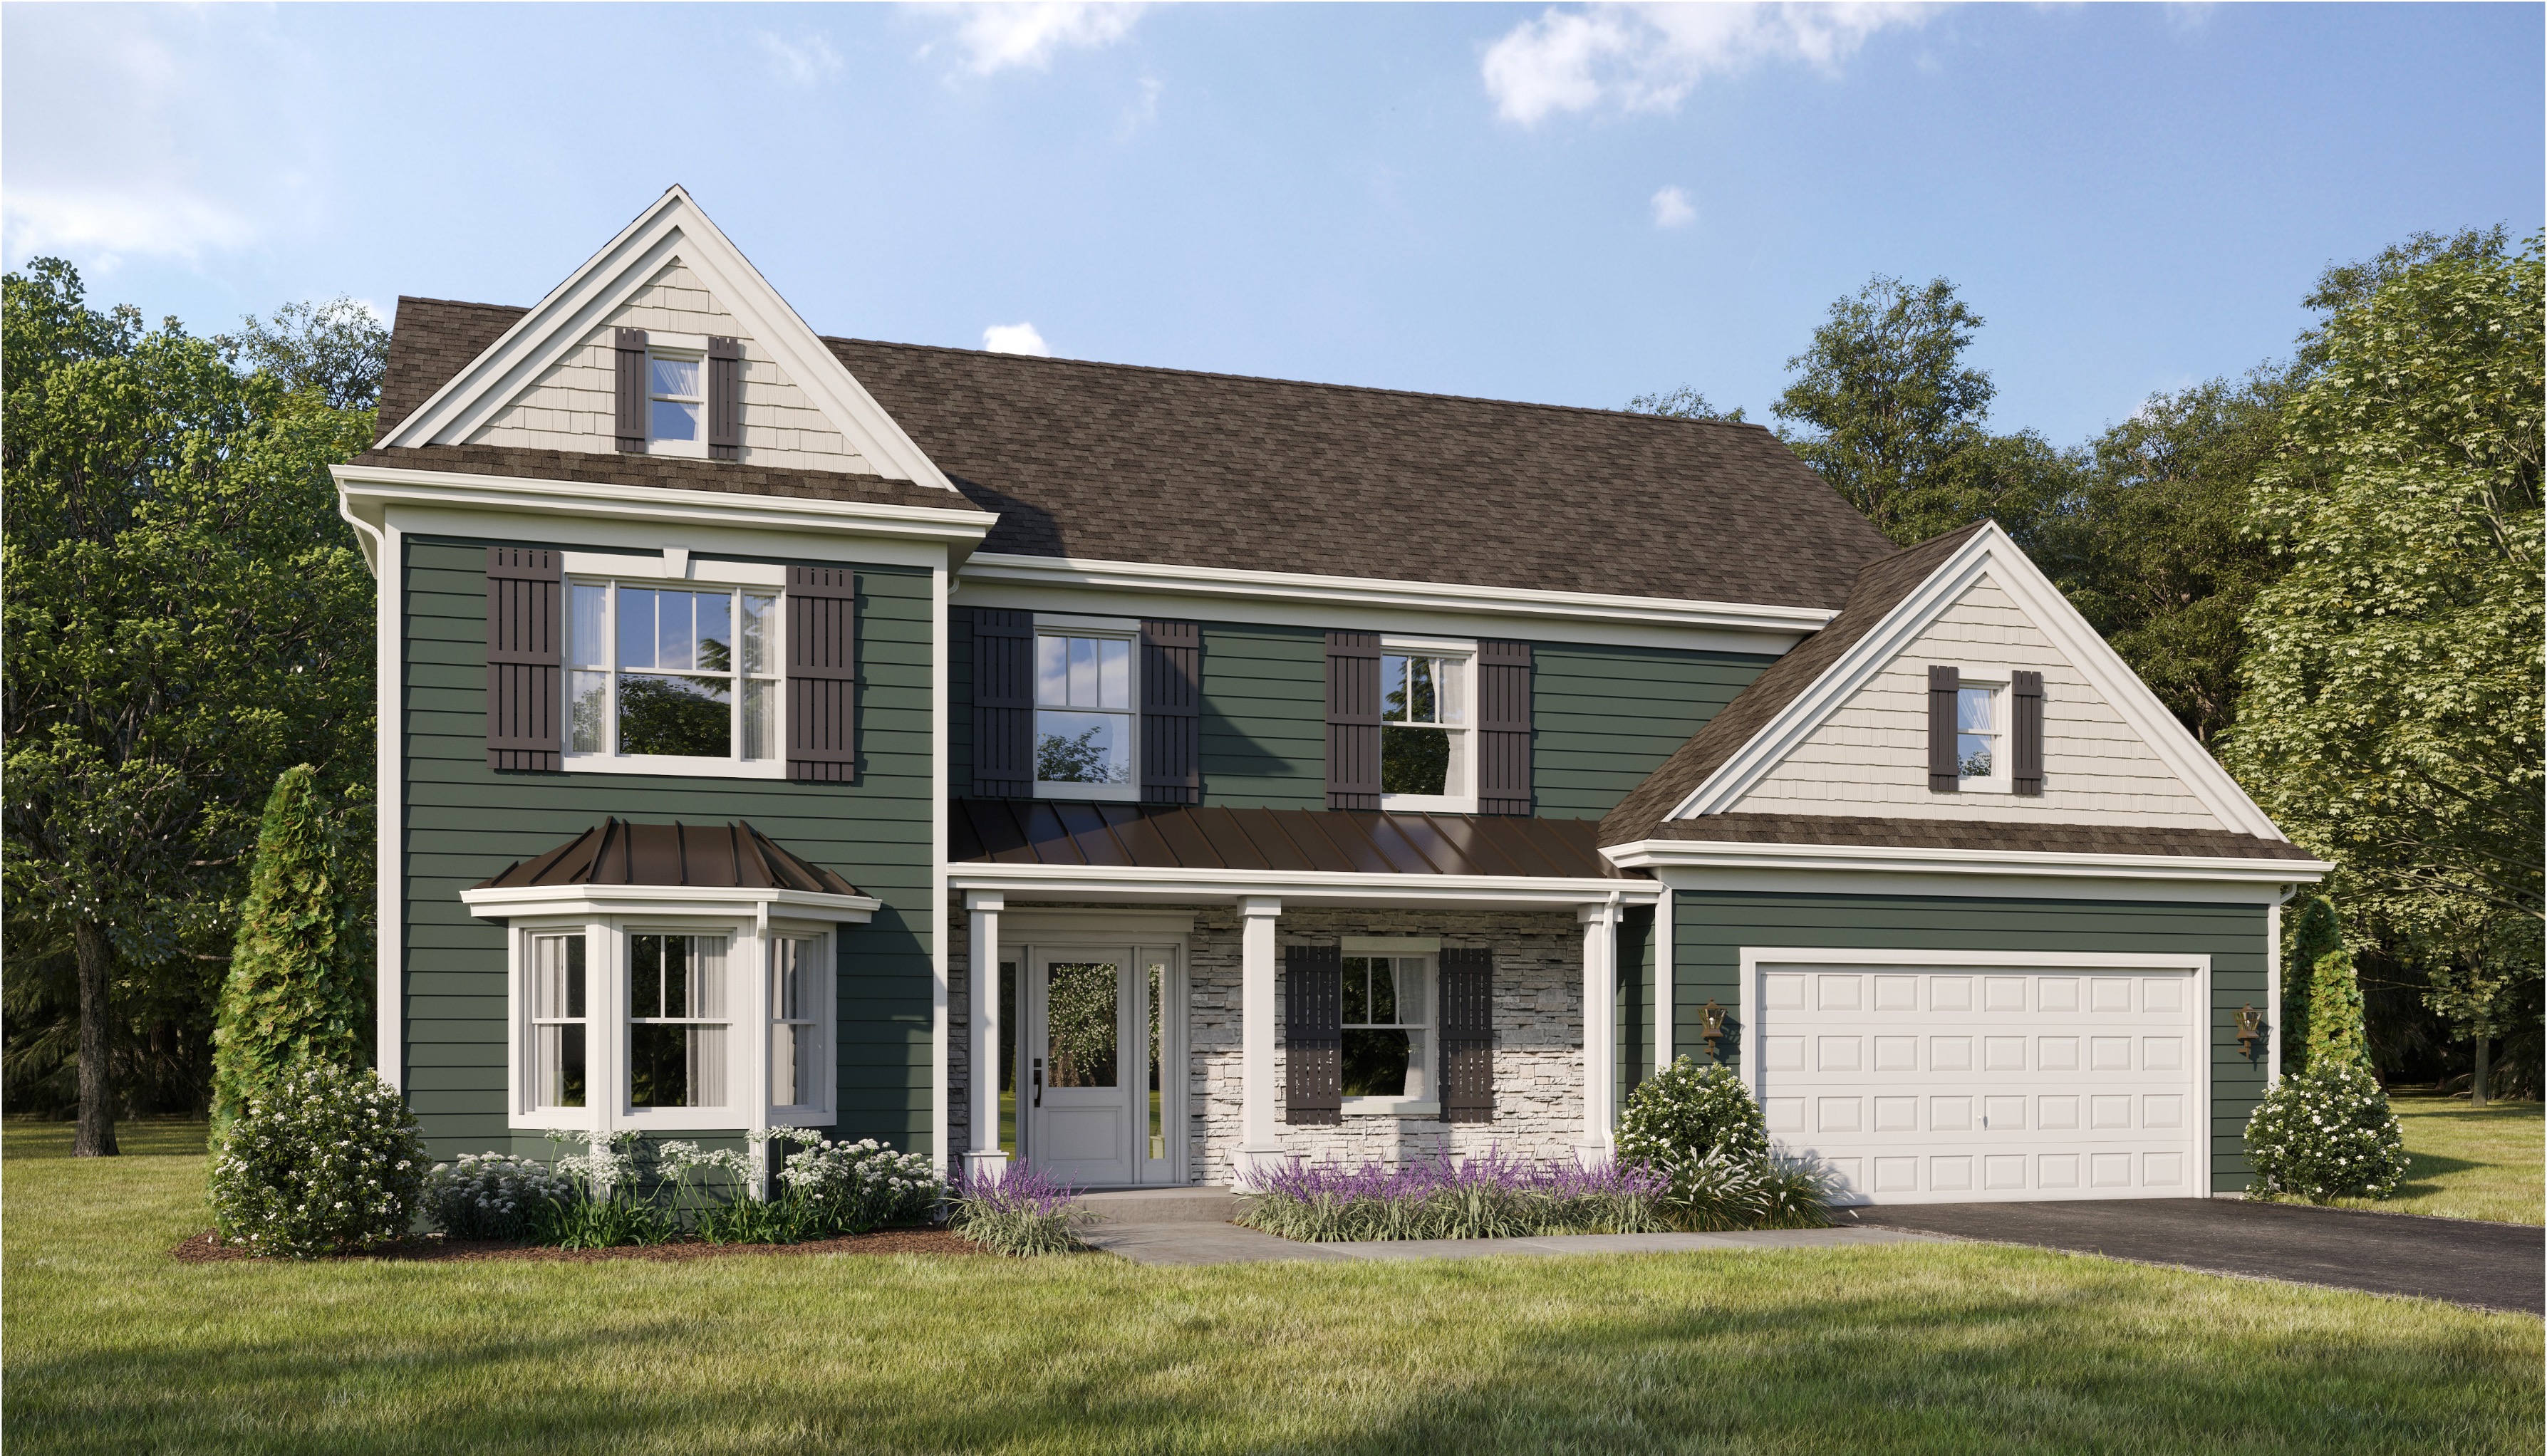 Rendering featuring 7" Foundry Split Shake siding in Eggshell 034, green vinyl lap siding, Versetta Stone panelized stone siding in Tight-Cut Sand, and ​Mid America three- and five-board spaced shutters in Tuxedo Grey 018​.